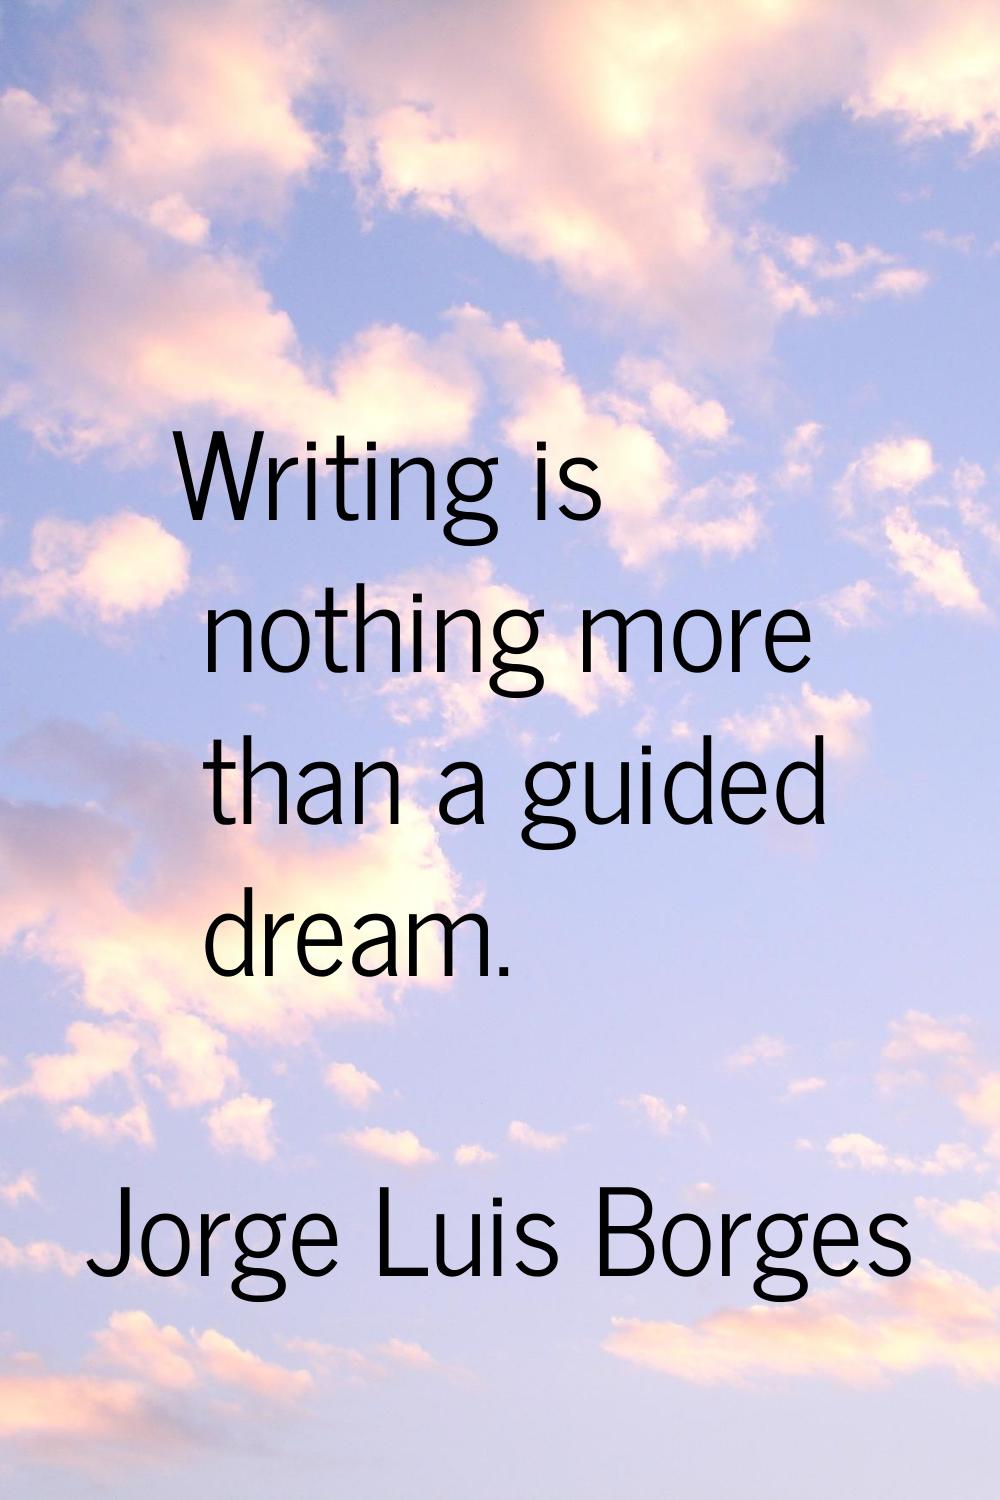 Writing is nothing more than a guided dream.